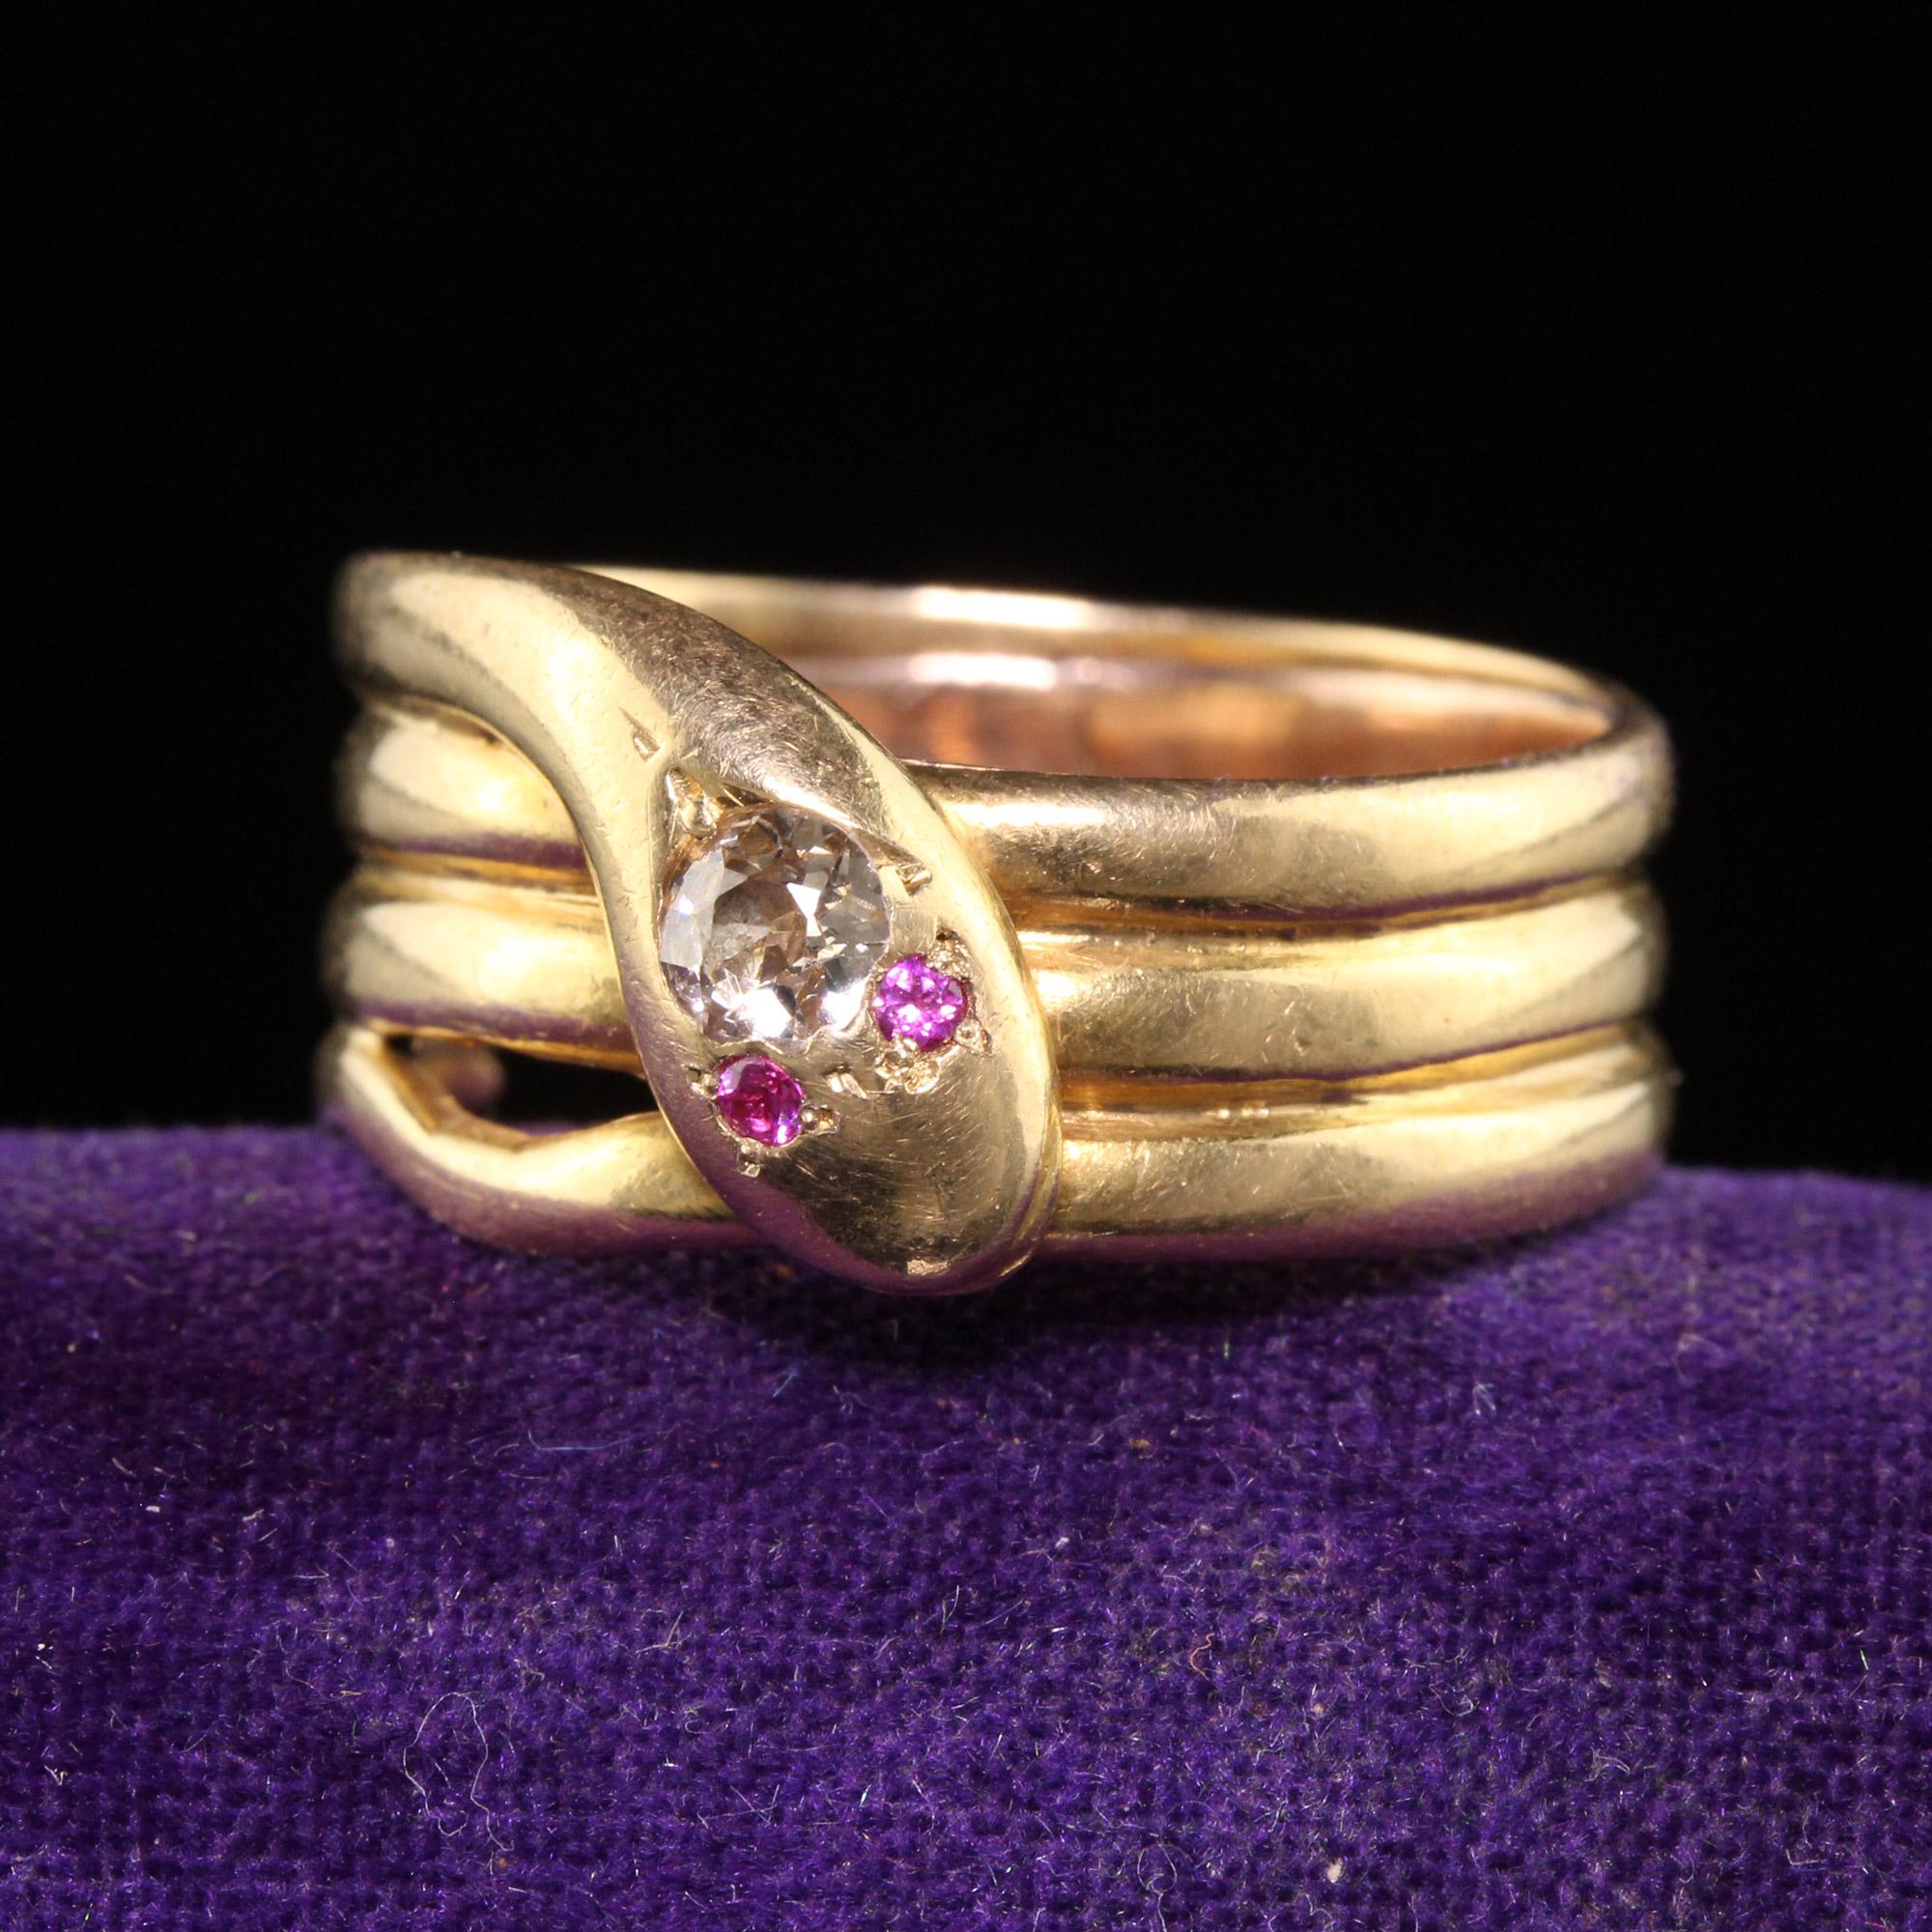 Beautiful Antique Victorian 18K Yellow Gold Old Mine Diamond Wide Snake Ring. This beautiful snake ring is crafted in 18k yellow gold. The head of the snake features a chunky old mine cut diamond on its head with two small rubies as its eyes. The